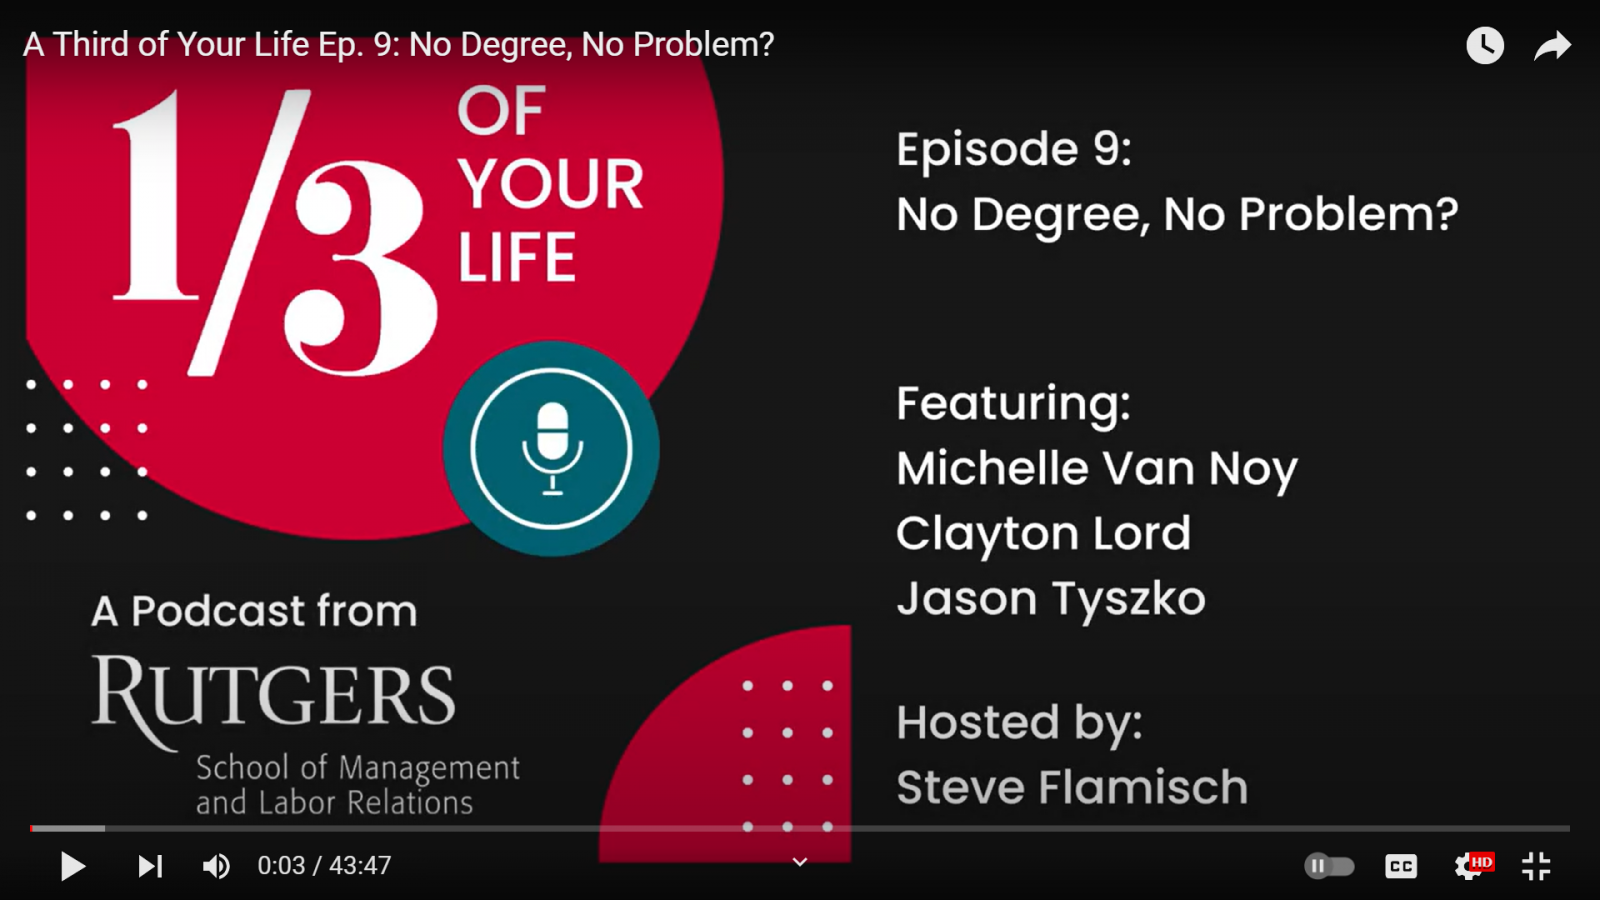 1/3 of your life podcast ft. Michelle Van Noy